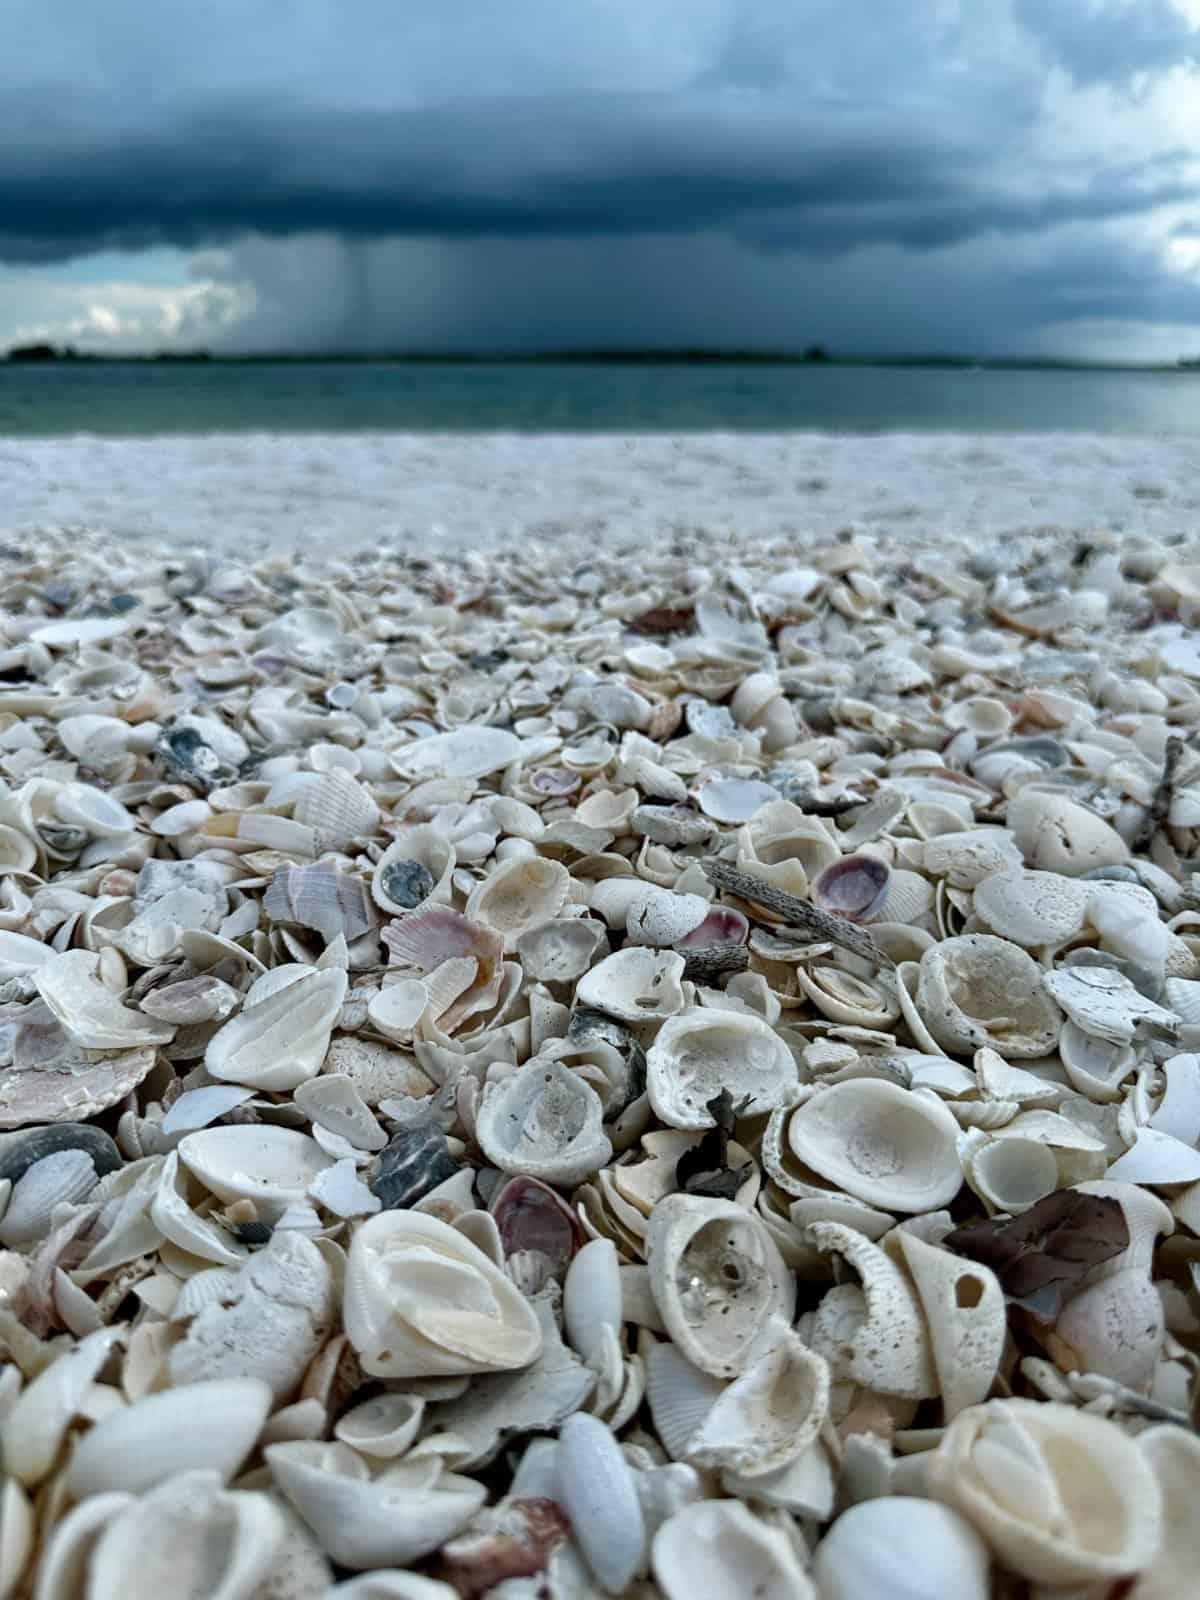 Dolphin Explorer ecotour boat trip in Marco Island, FL - stormy sky & lots of shells on the beach